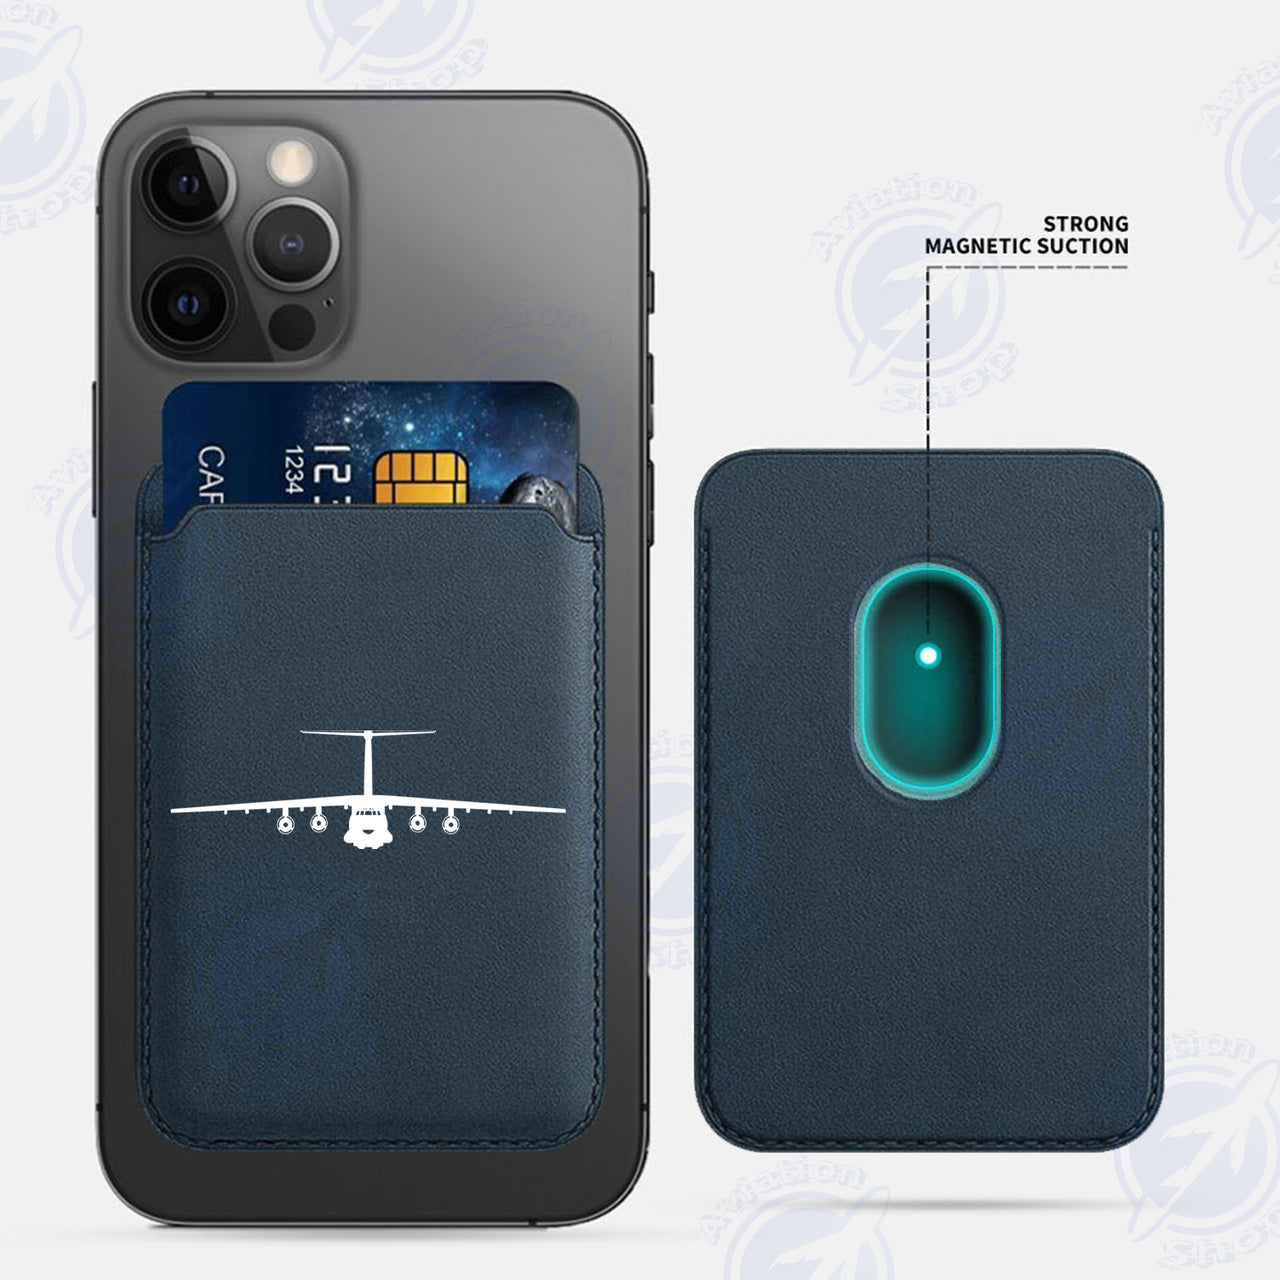 Ilyushin IL-76 Silhouette iPhone Cases Magnetic Card Wallet